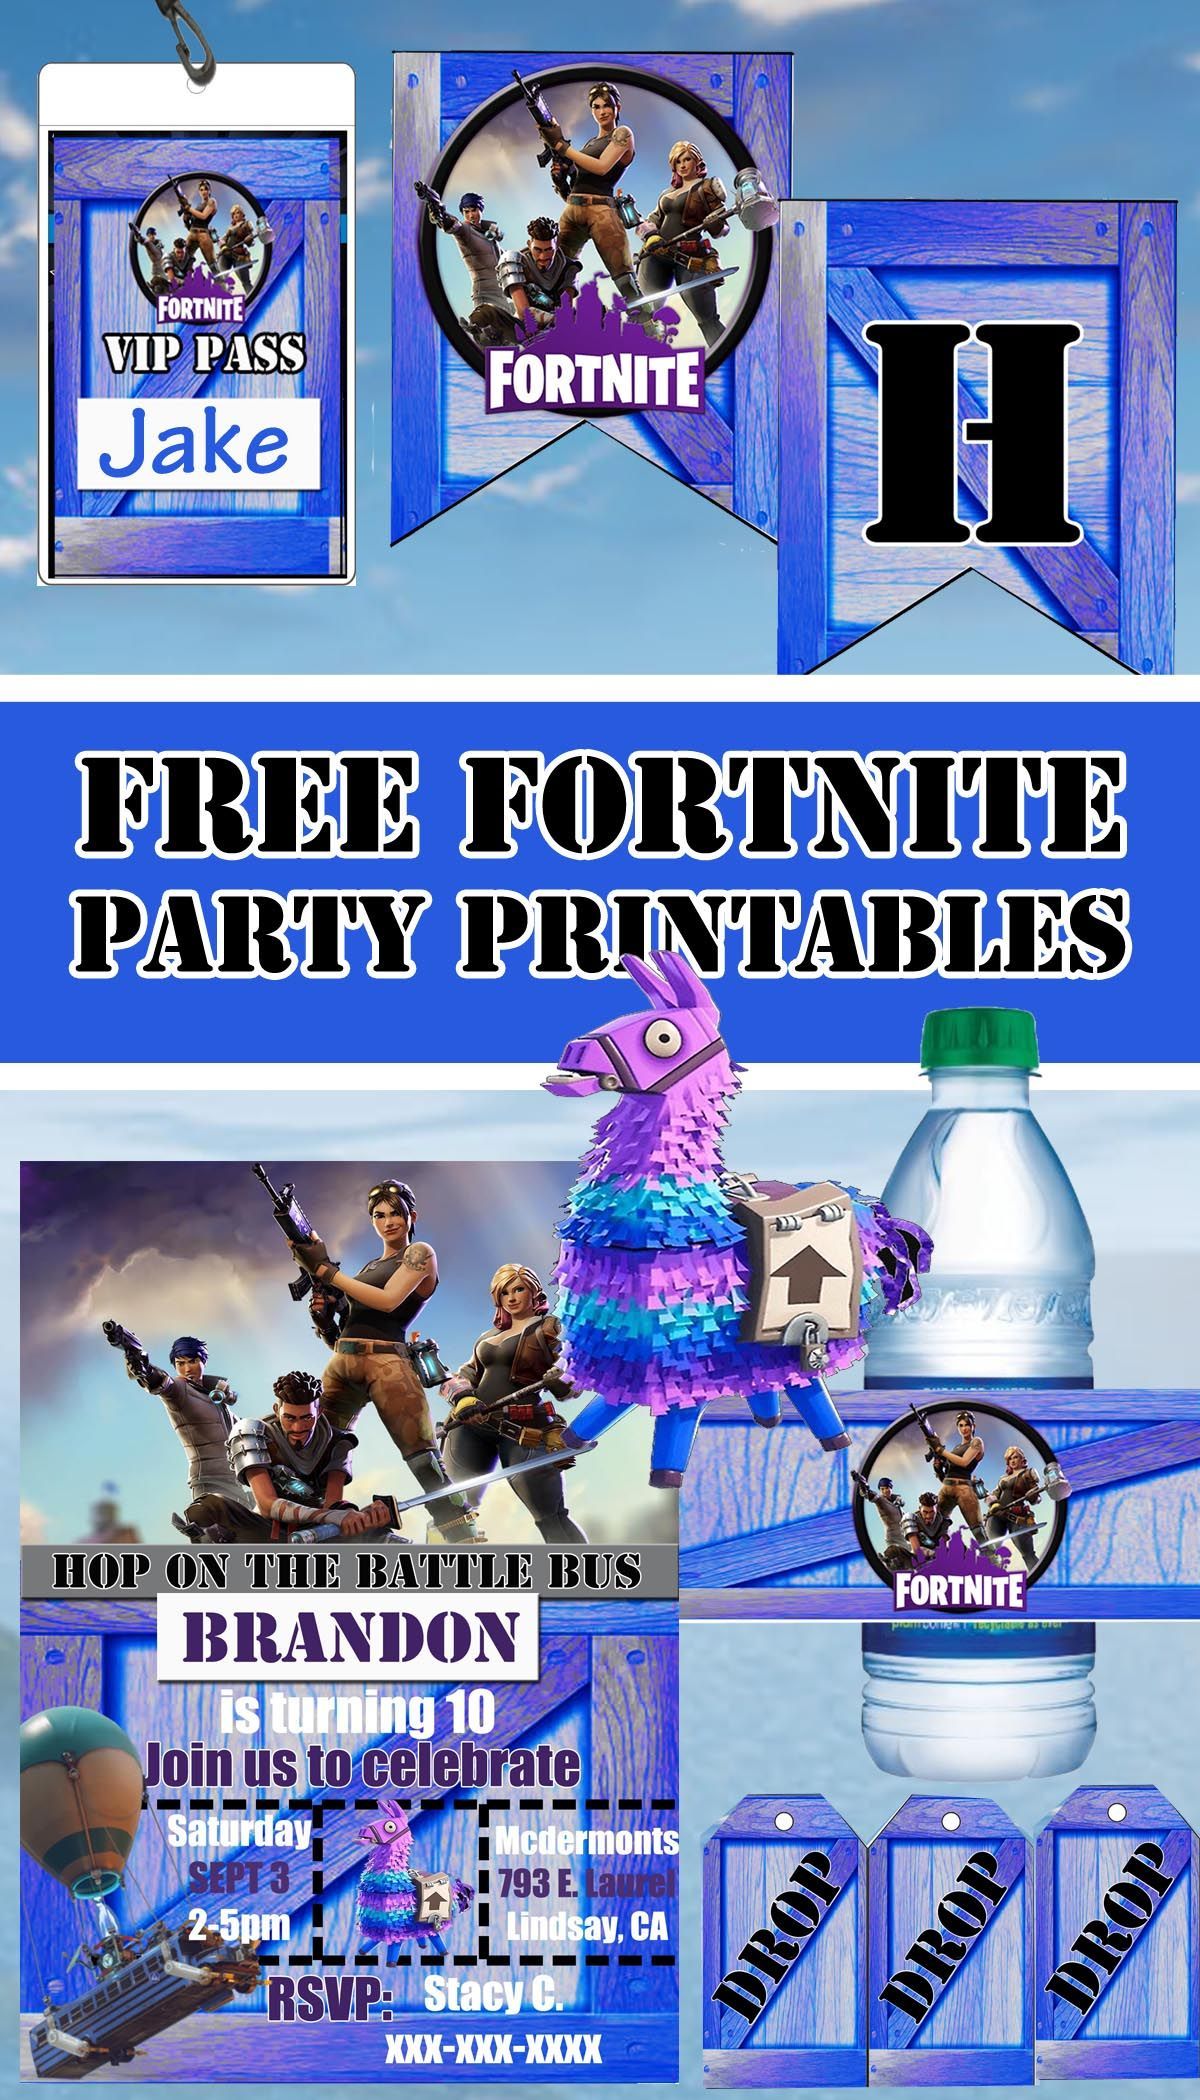 Happy Birthday Fortnite Images Wallpapers